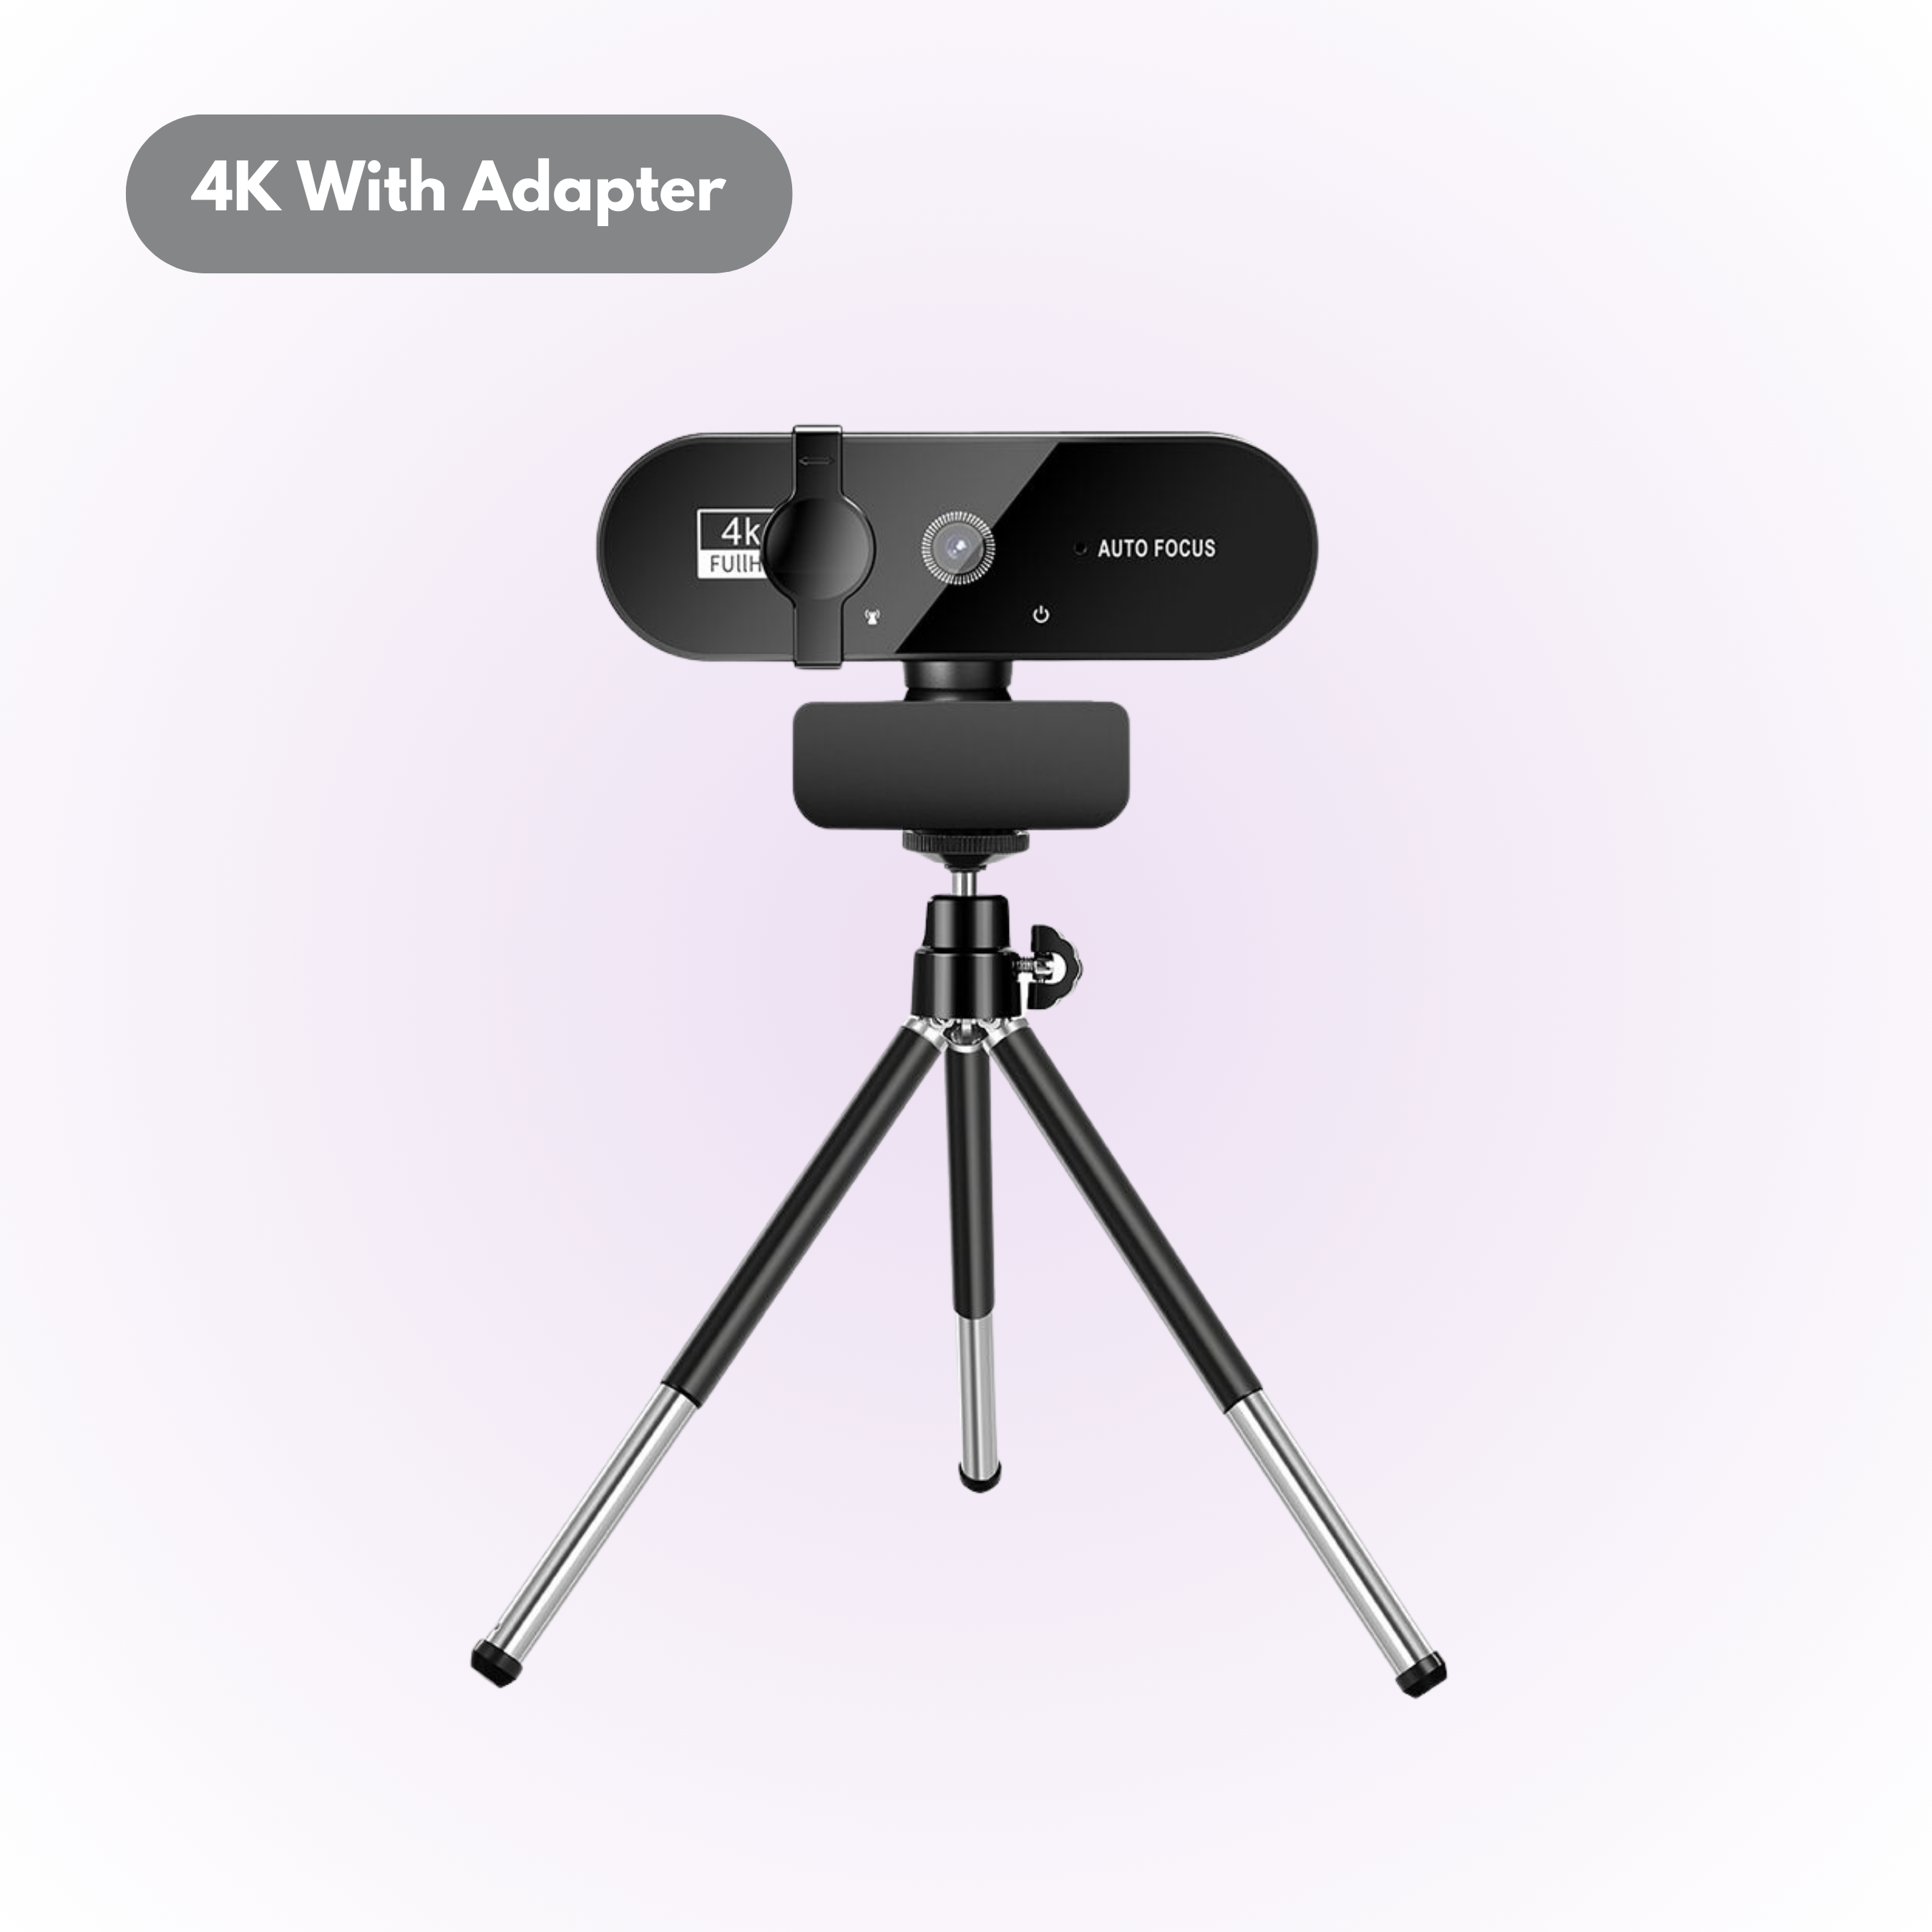 4k full hd Webcam with Built-in Microphone with tripod